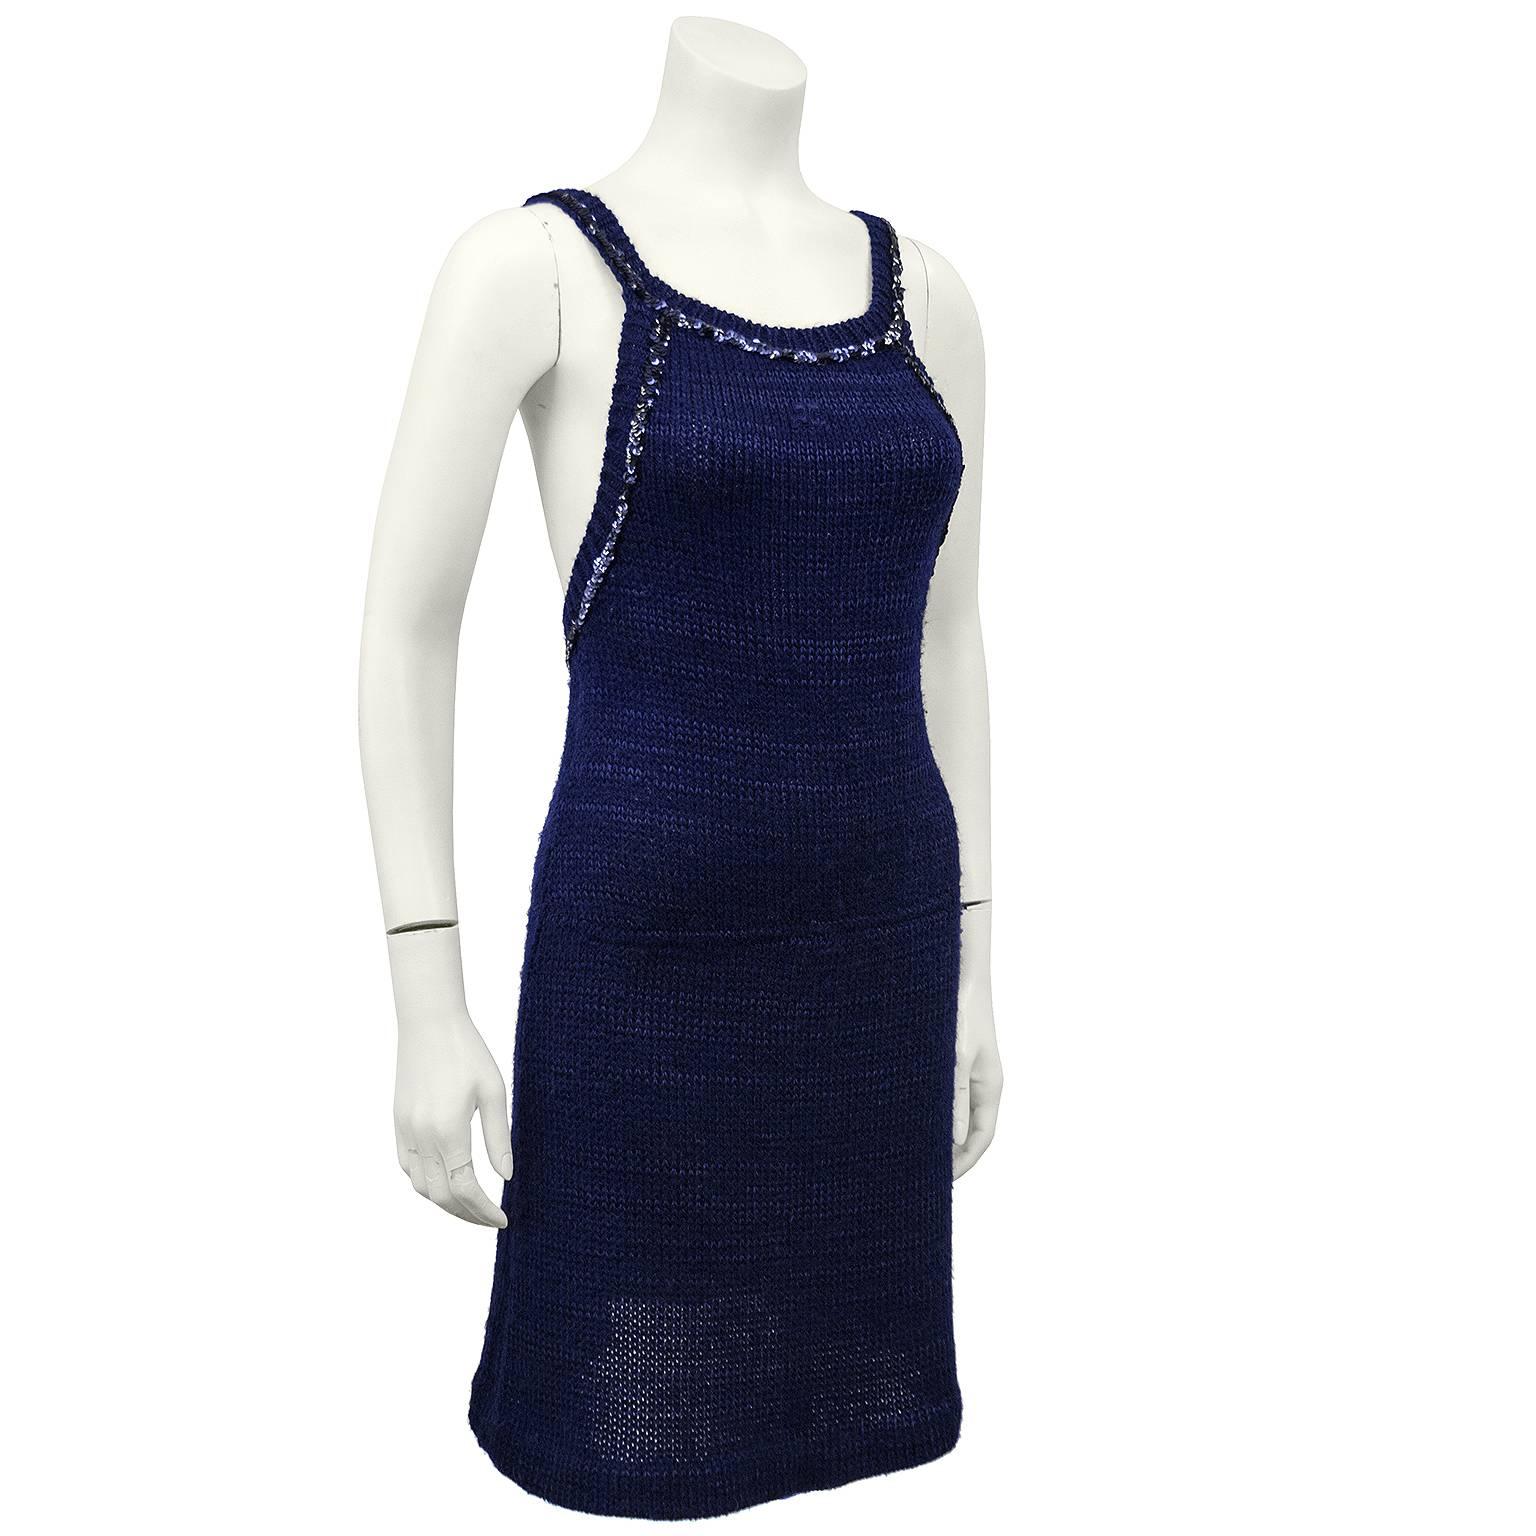 Amazing 1970s Courreges navy blue acrylic and wool knit halter dress. A touch of sparkle with navy blue sequin trim around the neckline, straps and back. Straps are attached with buttons and can be worn straight with and open back or crossed. Small